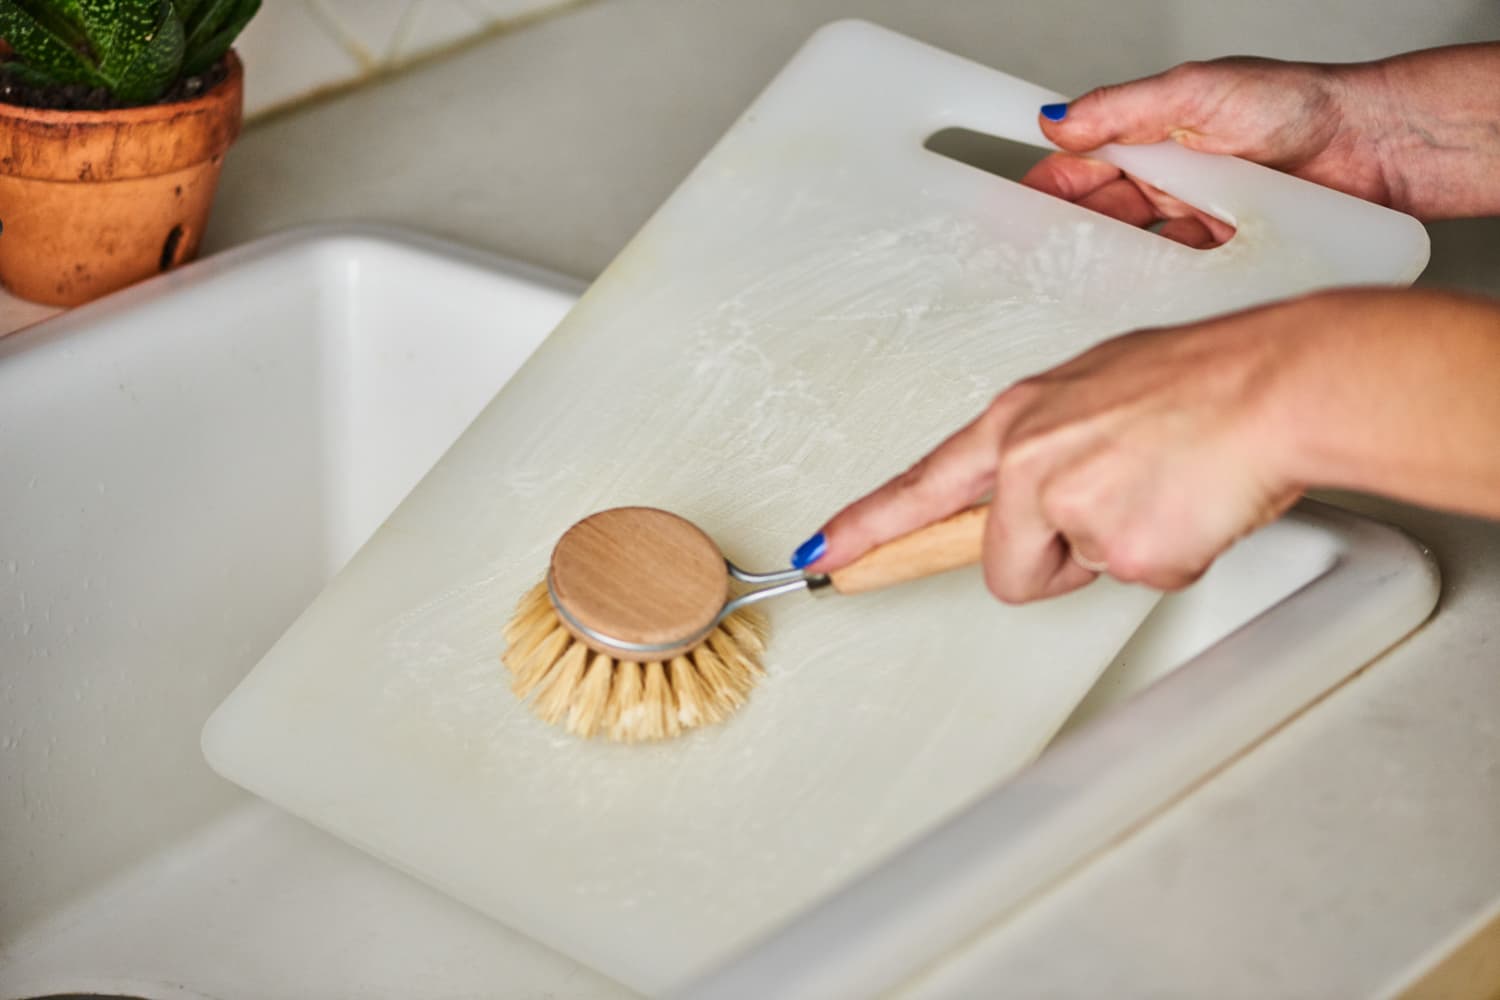 Making meals without microplastics: Tips for safer cutting boards